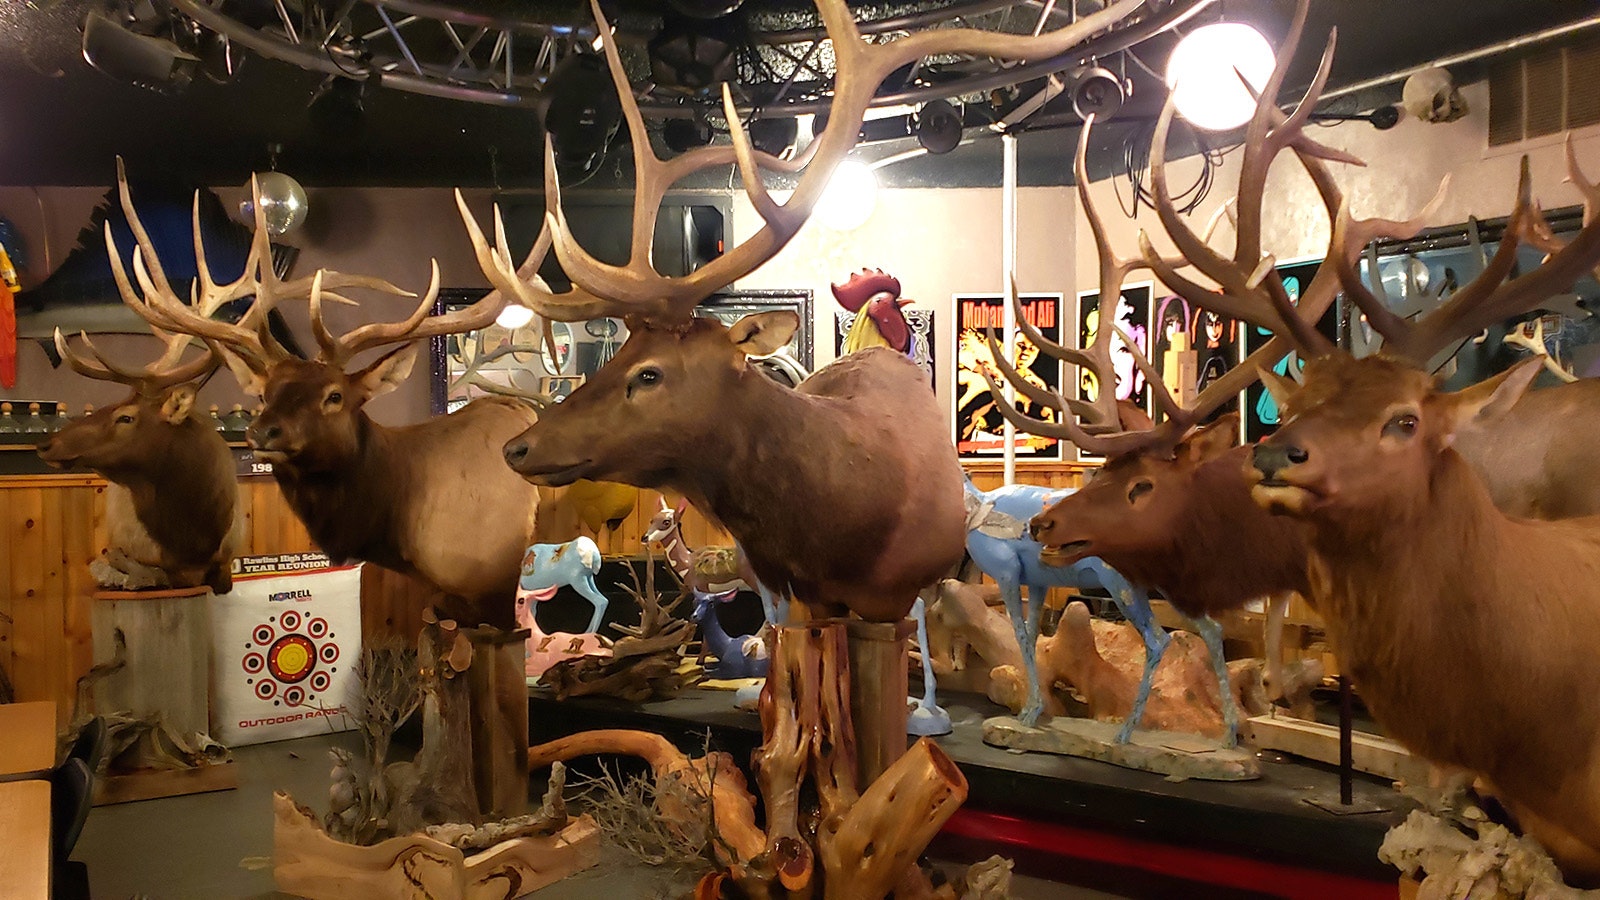 A menagerie of hunting trophies hangs out in the bar.